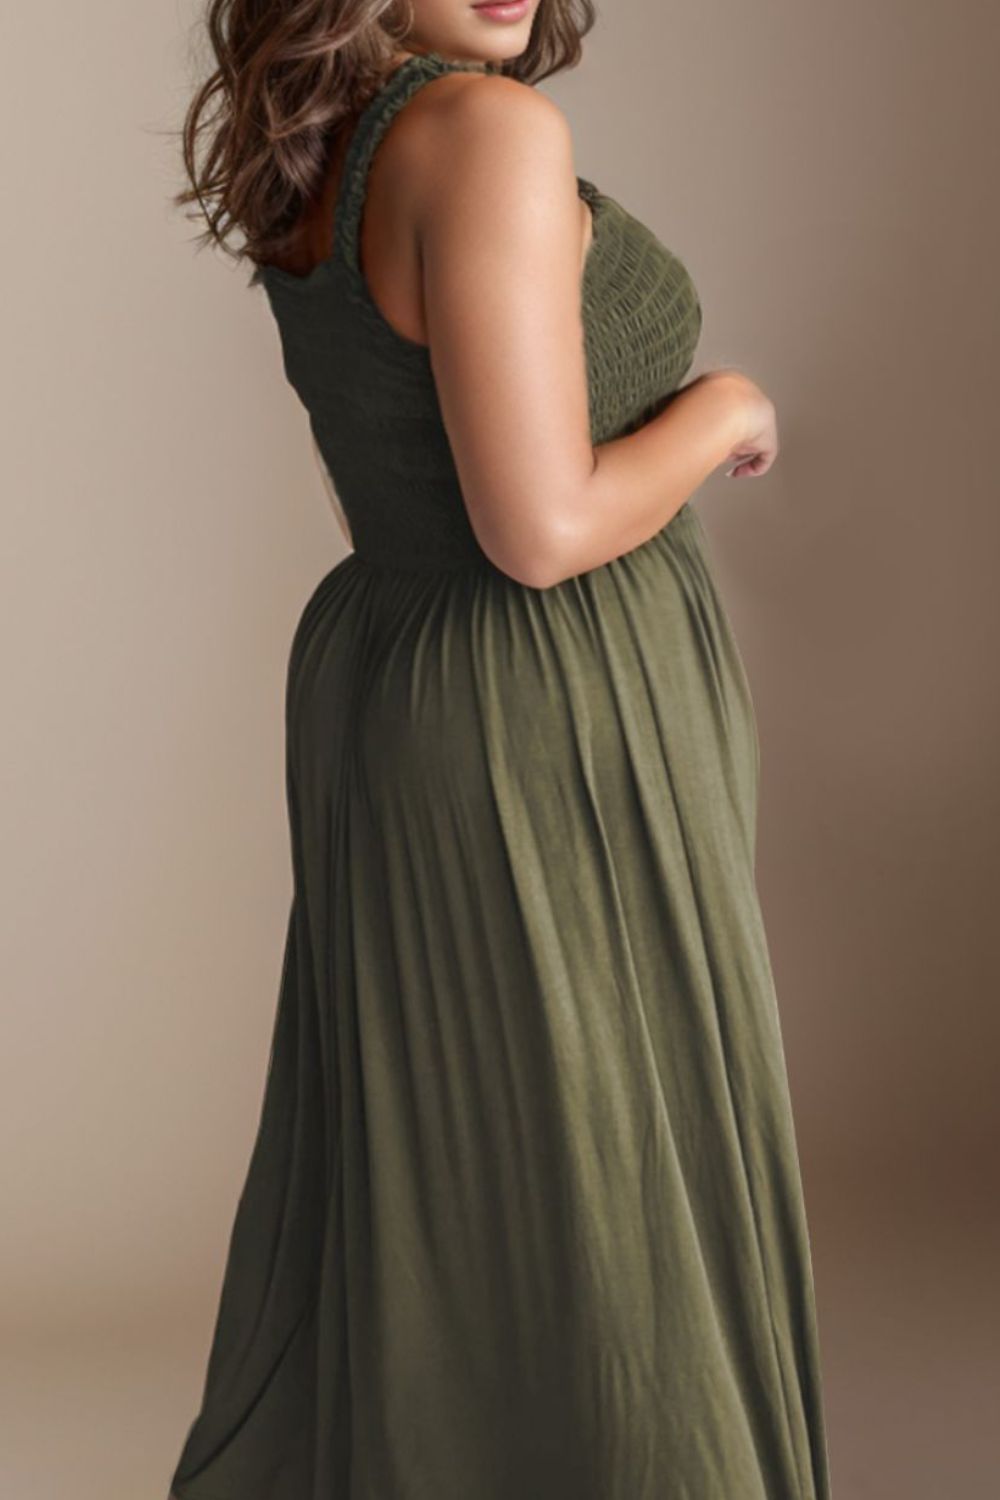 Olive Green Plus Size Dress Women's Casual Smocked Square Neck Short Sleeve Maxi Dress